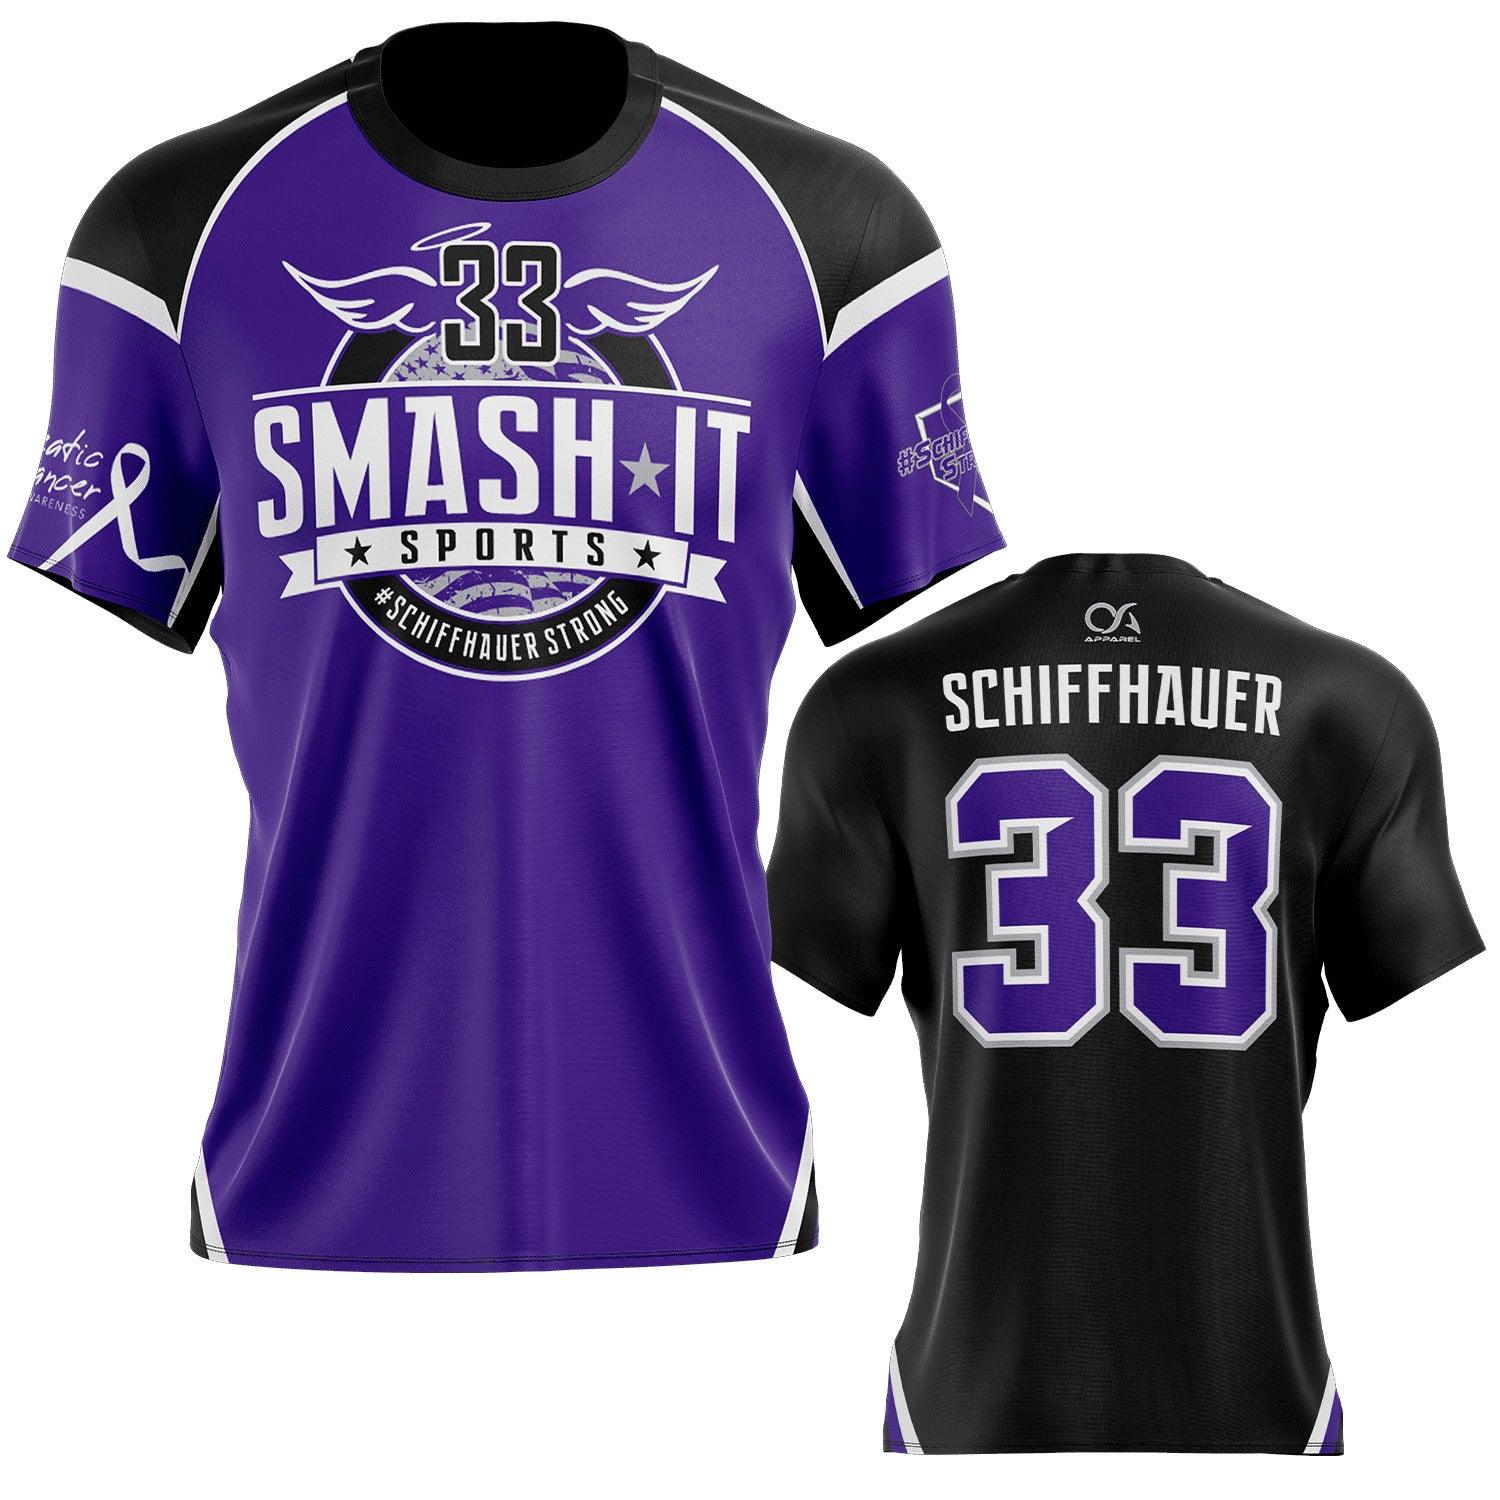 Schiffhauer Strong - Short Sleeve Jersey (Customized Buy-In) - Purple - Smash It Sports